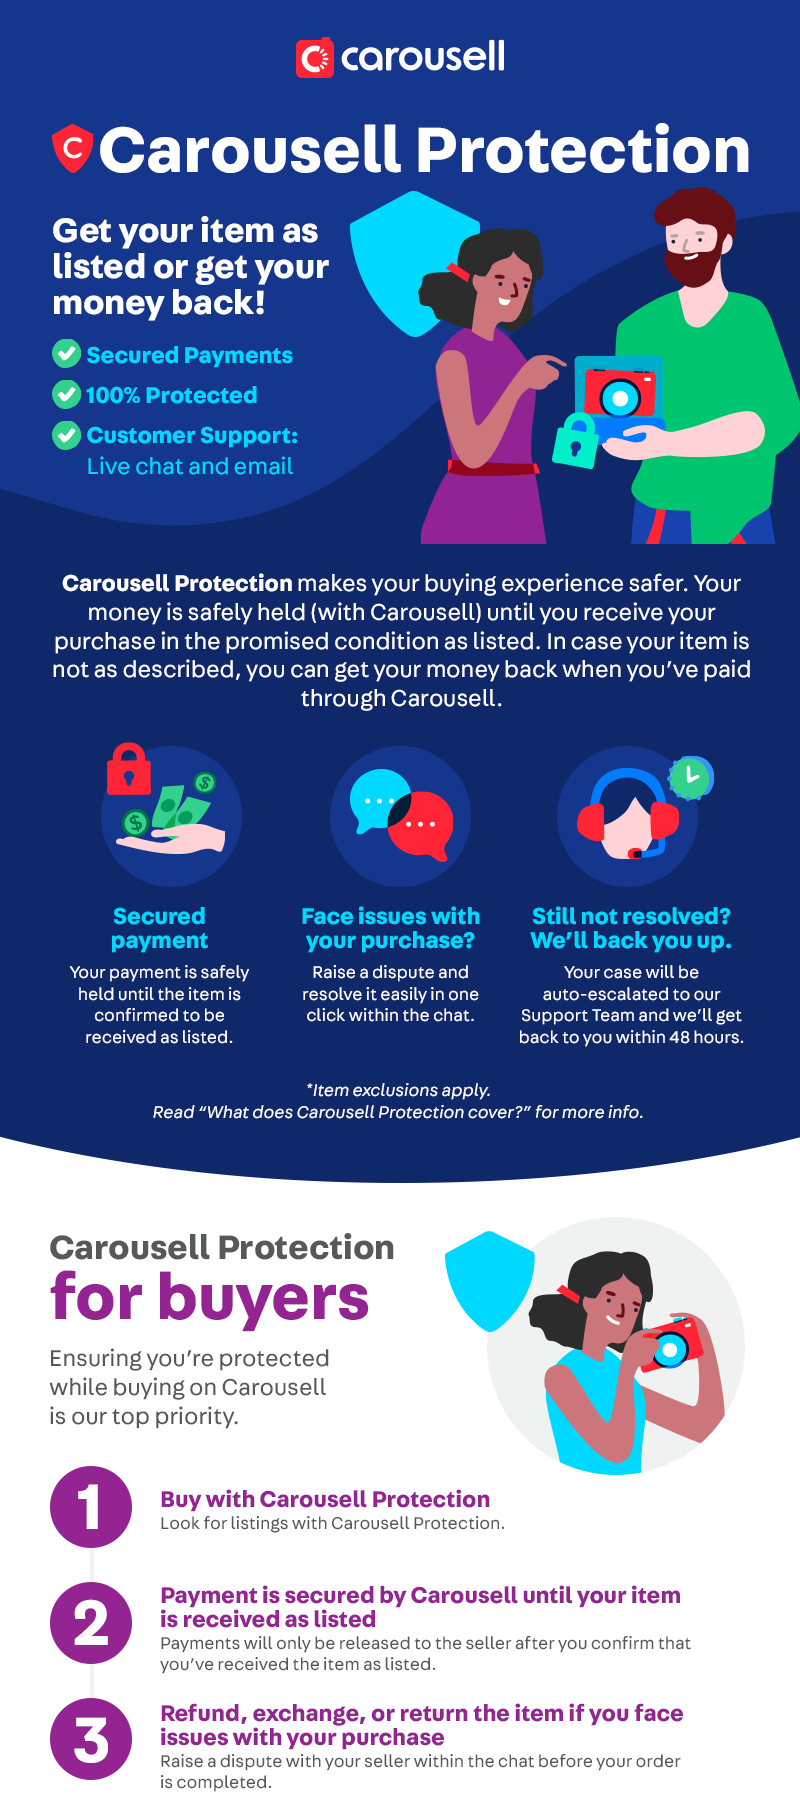 BuyerSG_CarousellProtection_Infographic.png